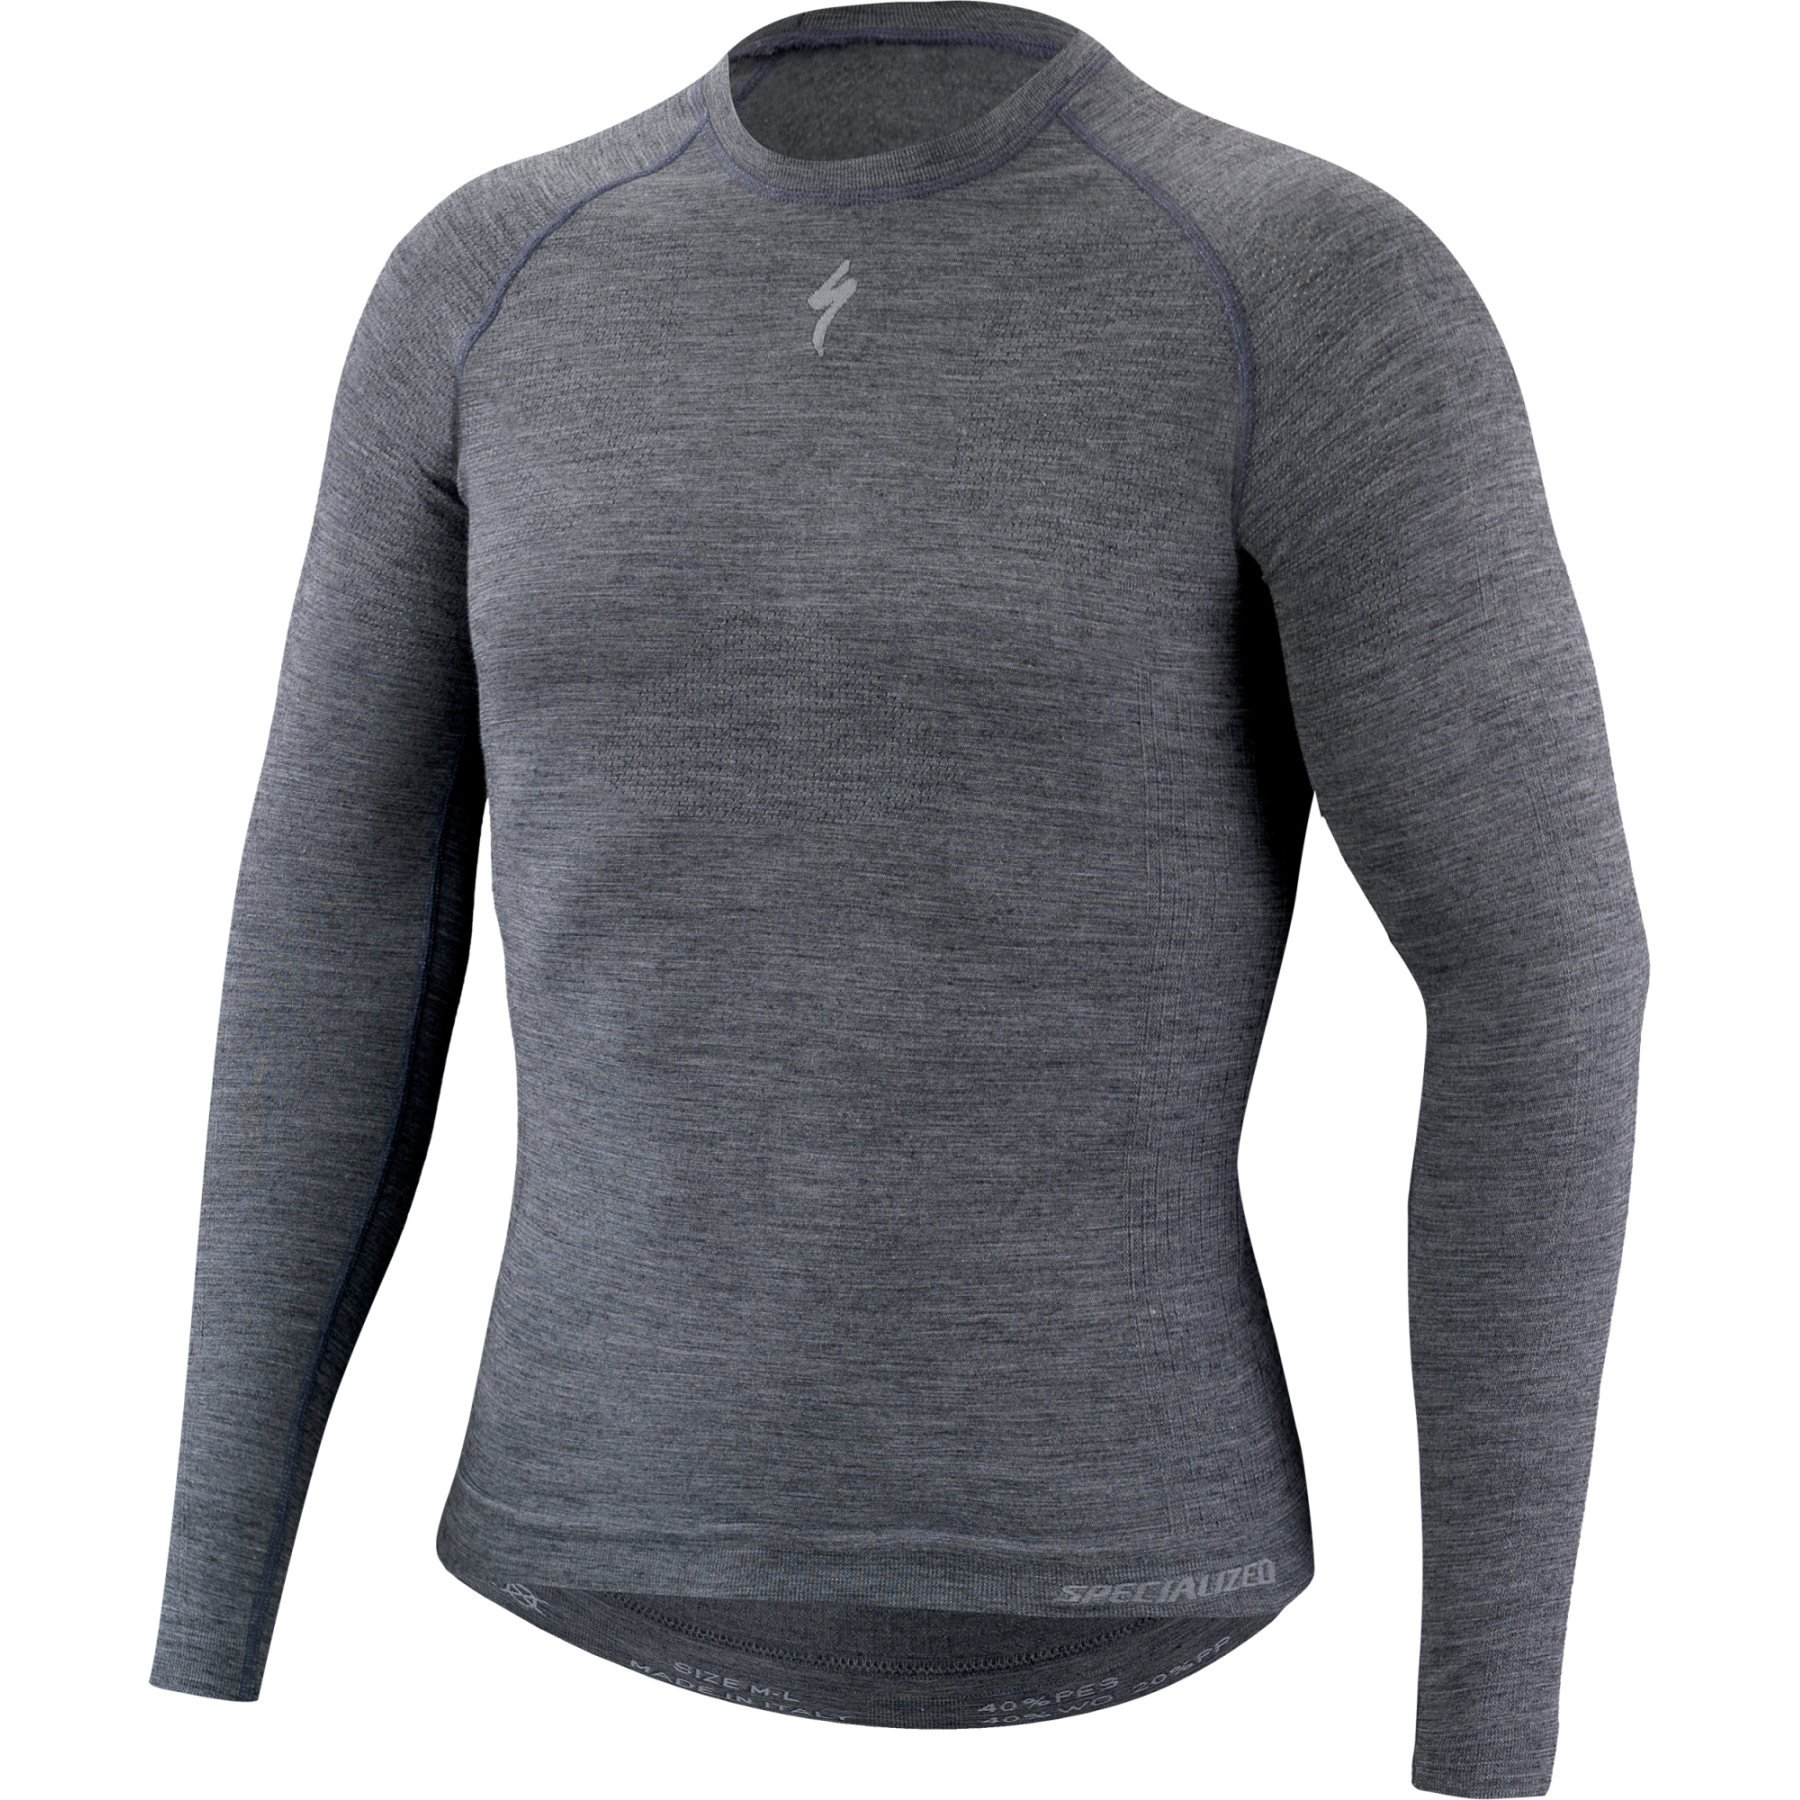 Picture of Specialized Seamless Merino Baselayer Longsleeve Shirt - grey